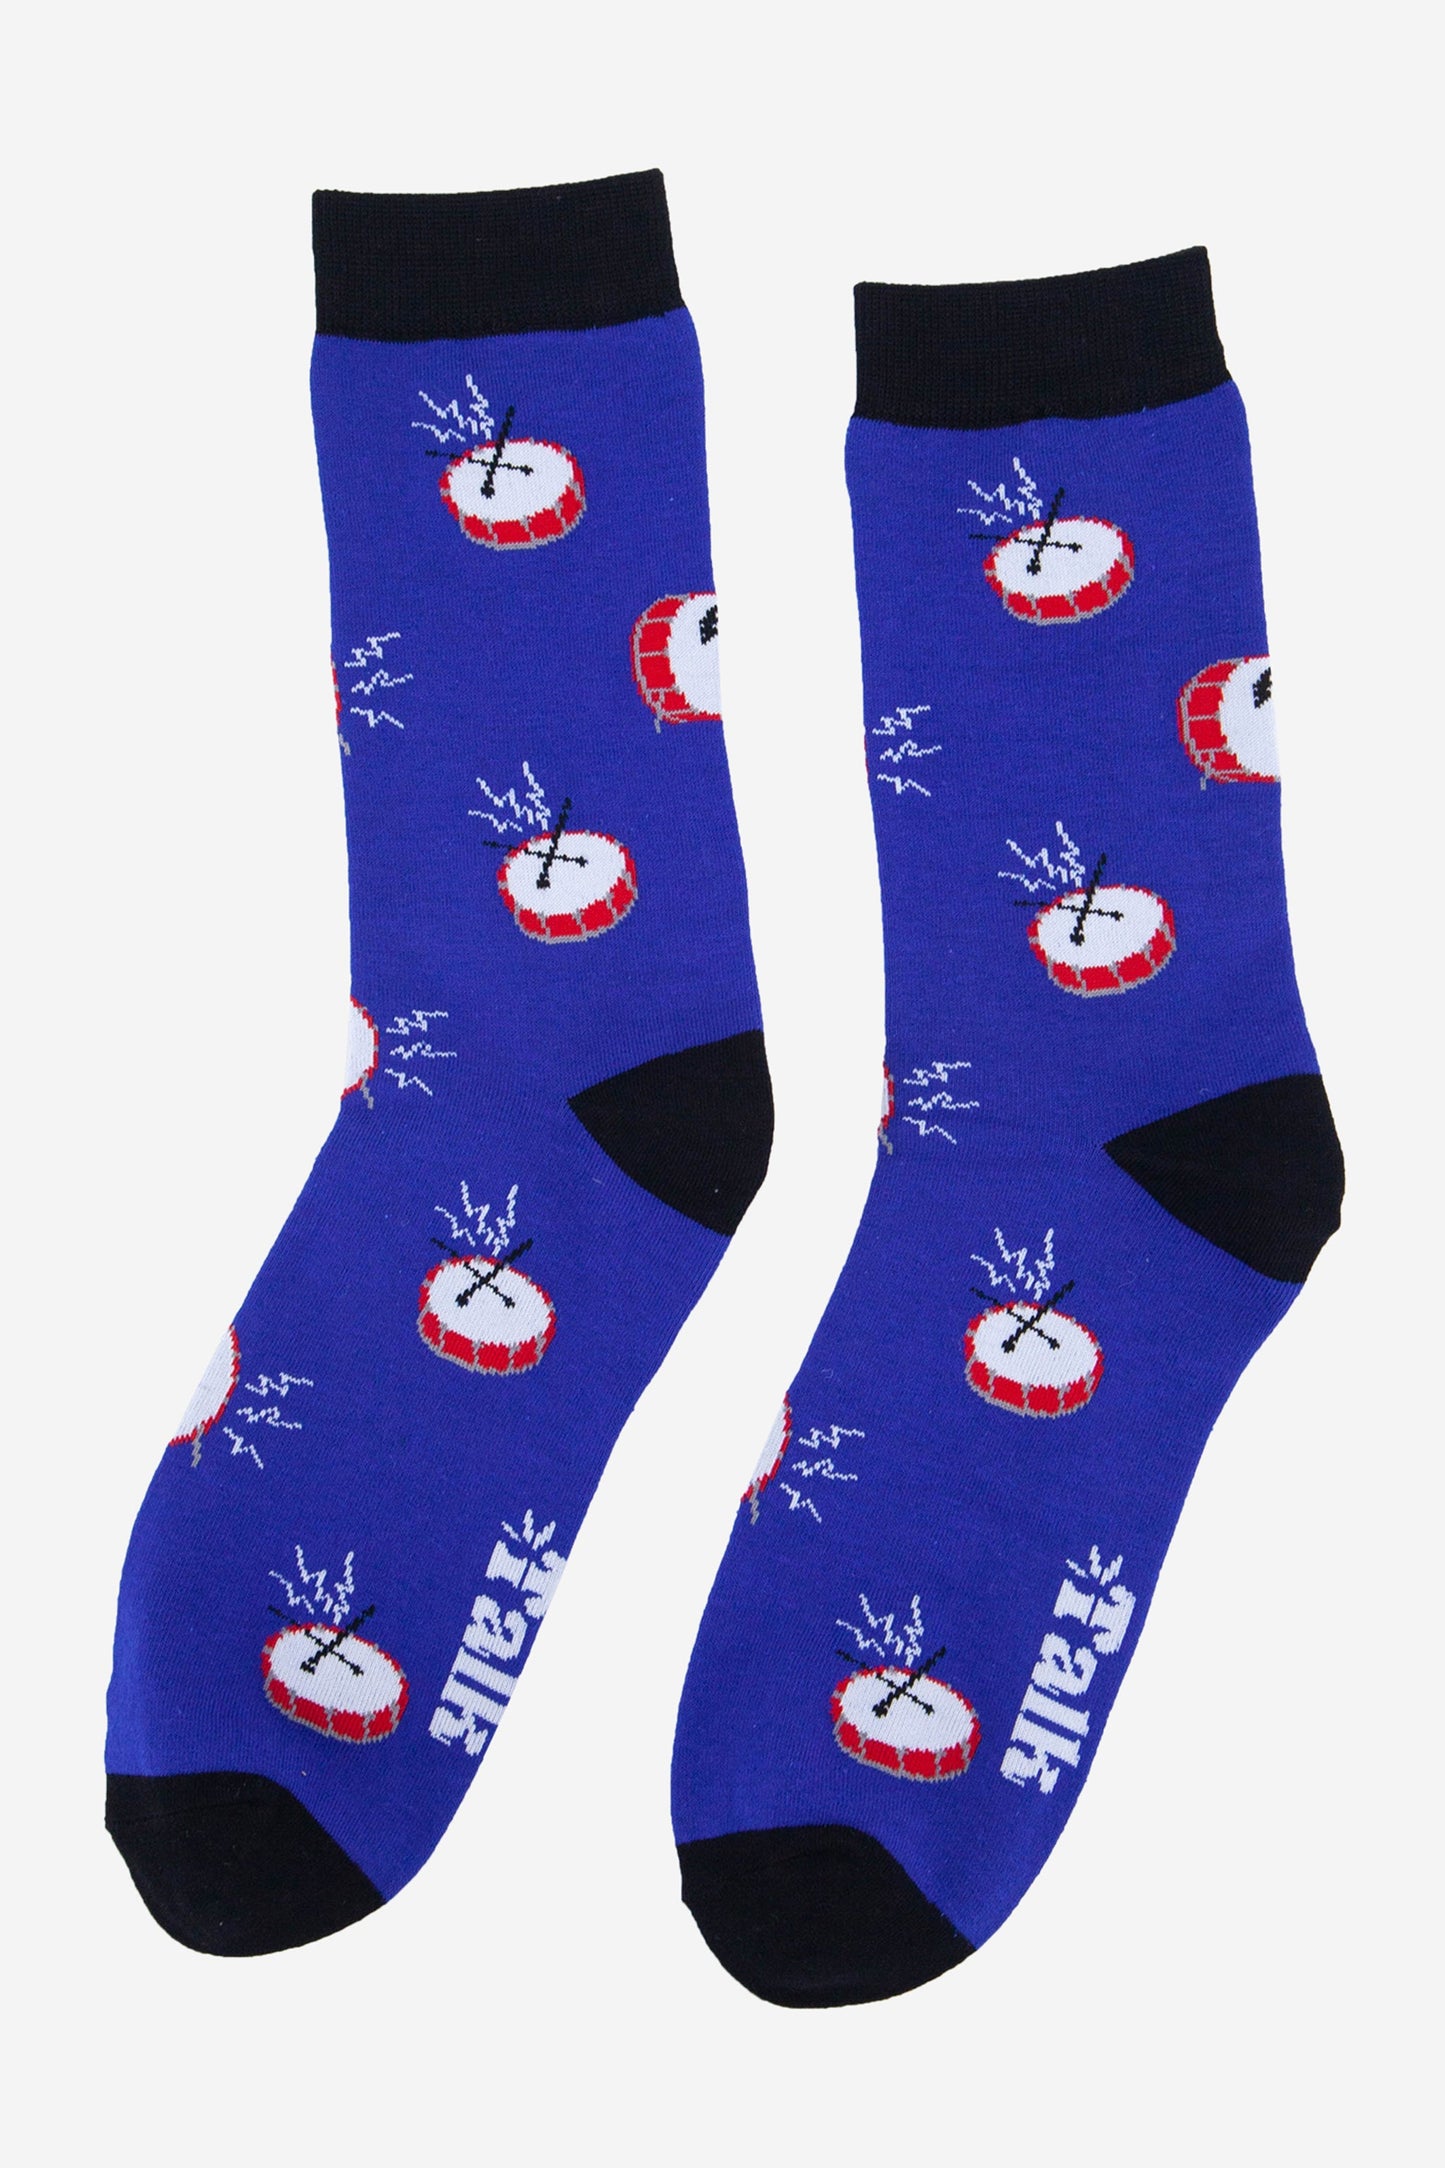 mens blue drummer socks with an all over pattern of banging drums